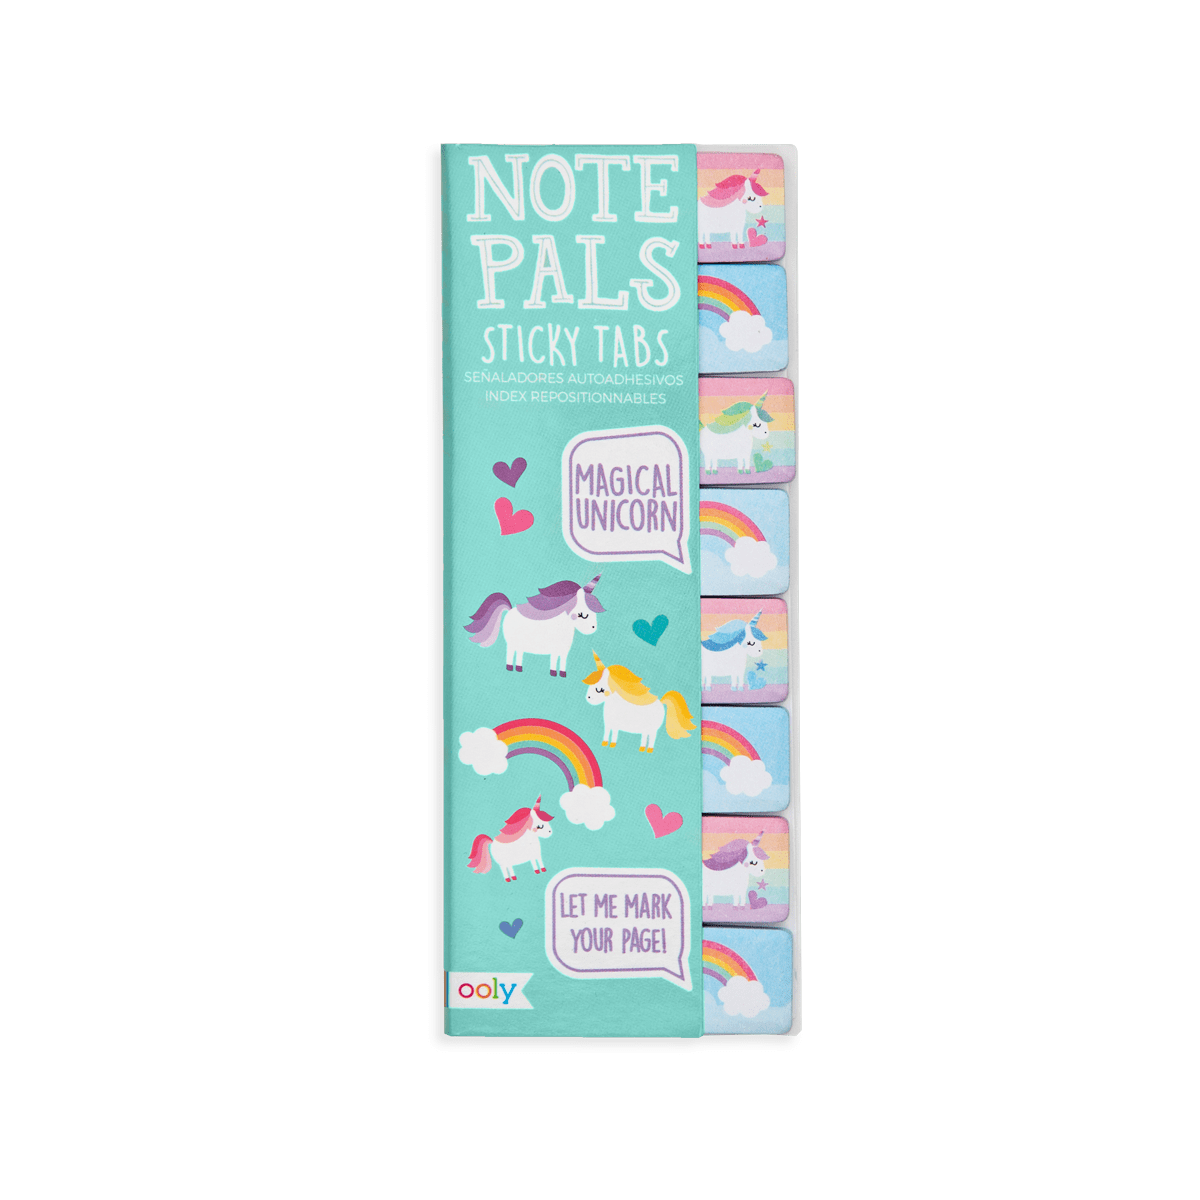 OOLY Oh My! Unicorns &amp; Mermaids Happy Pack by OOLY